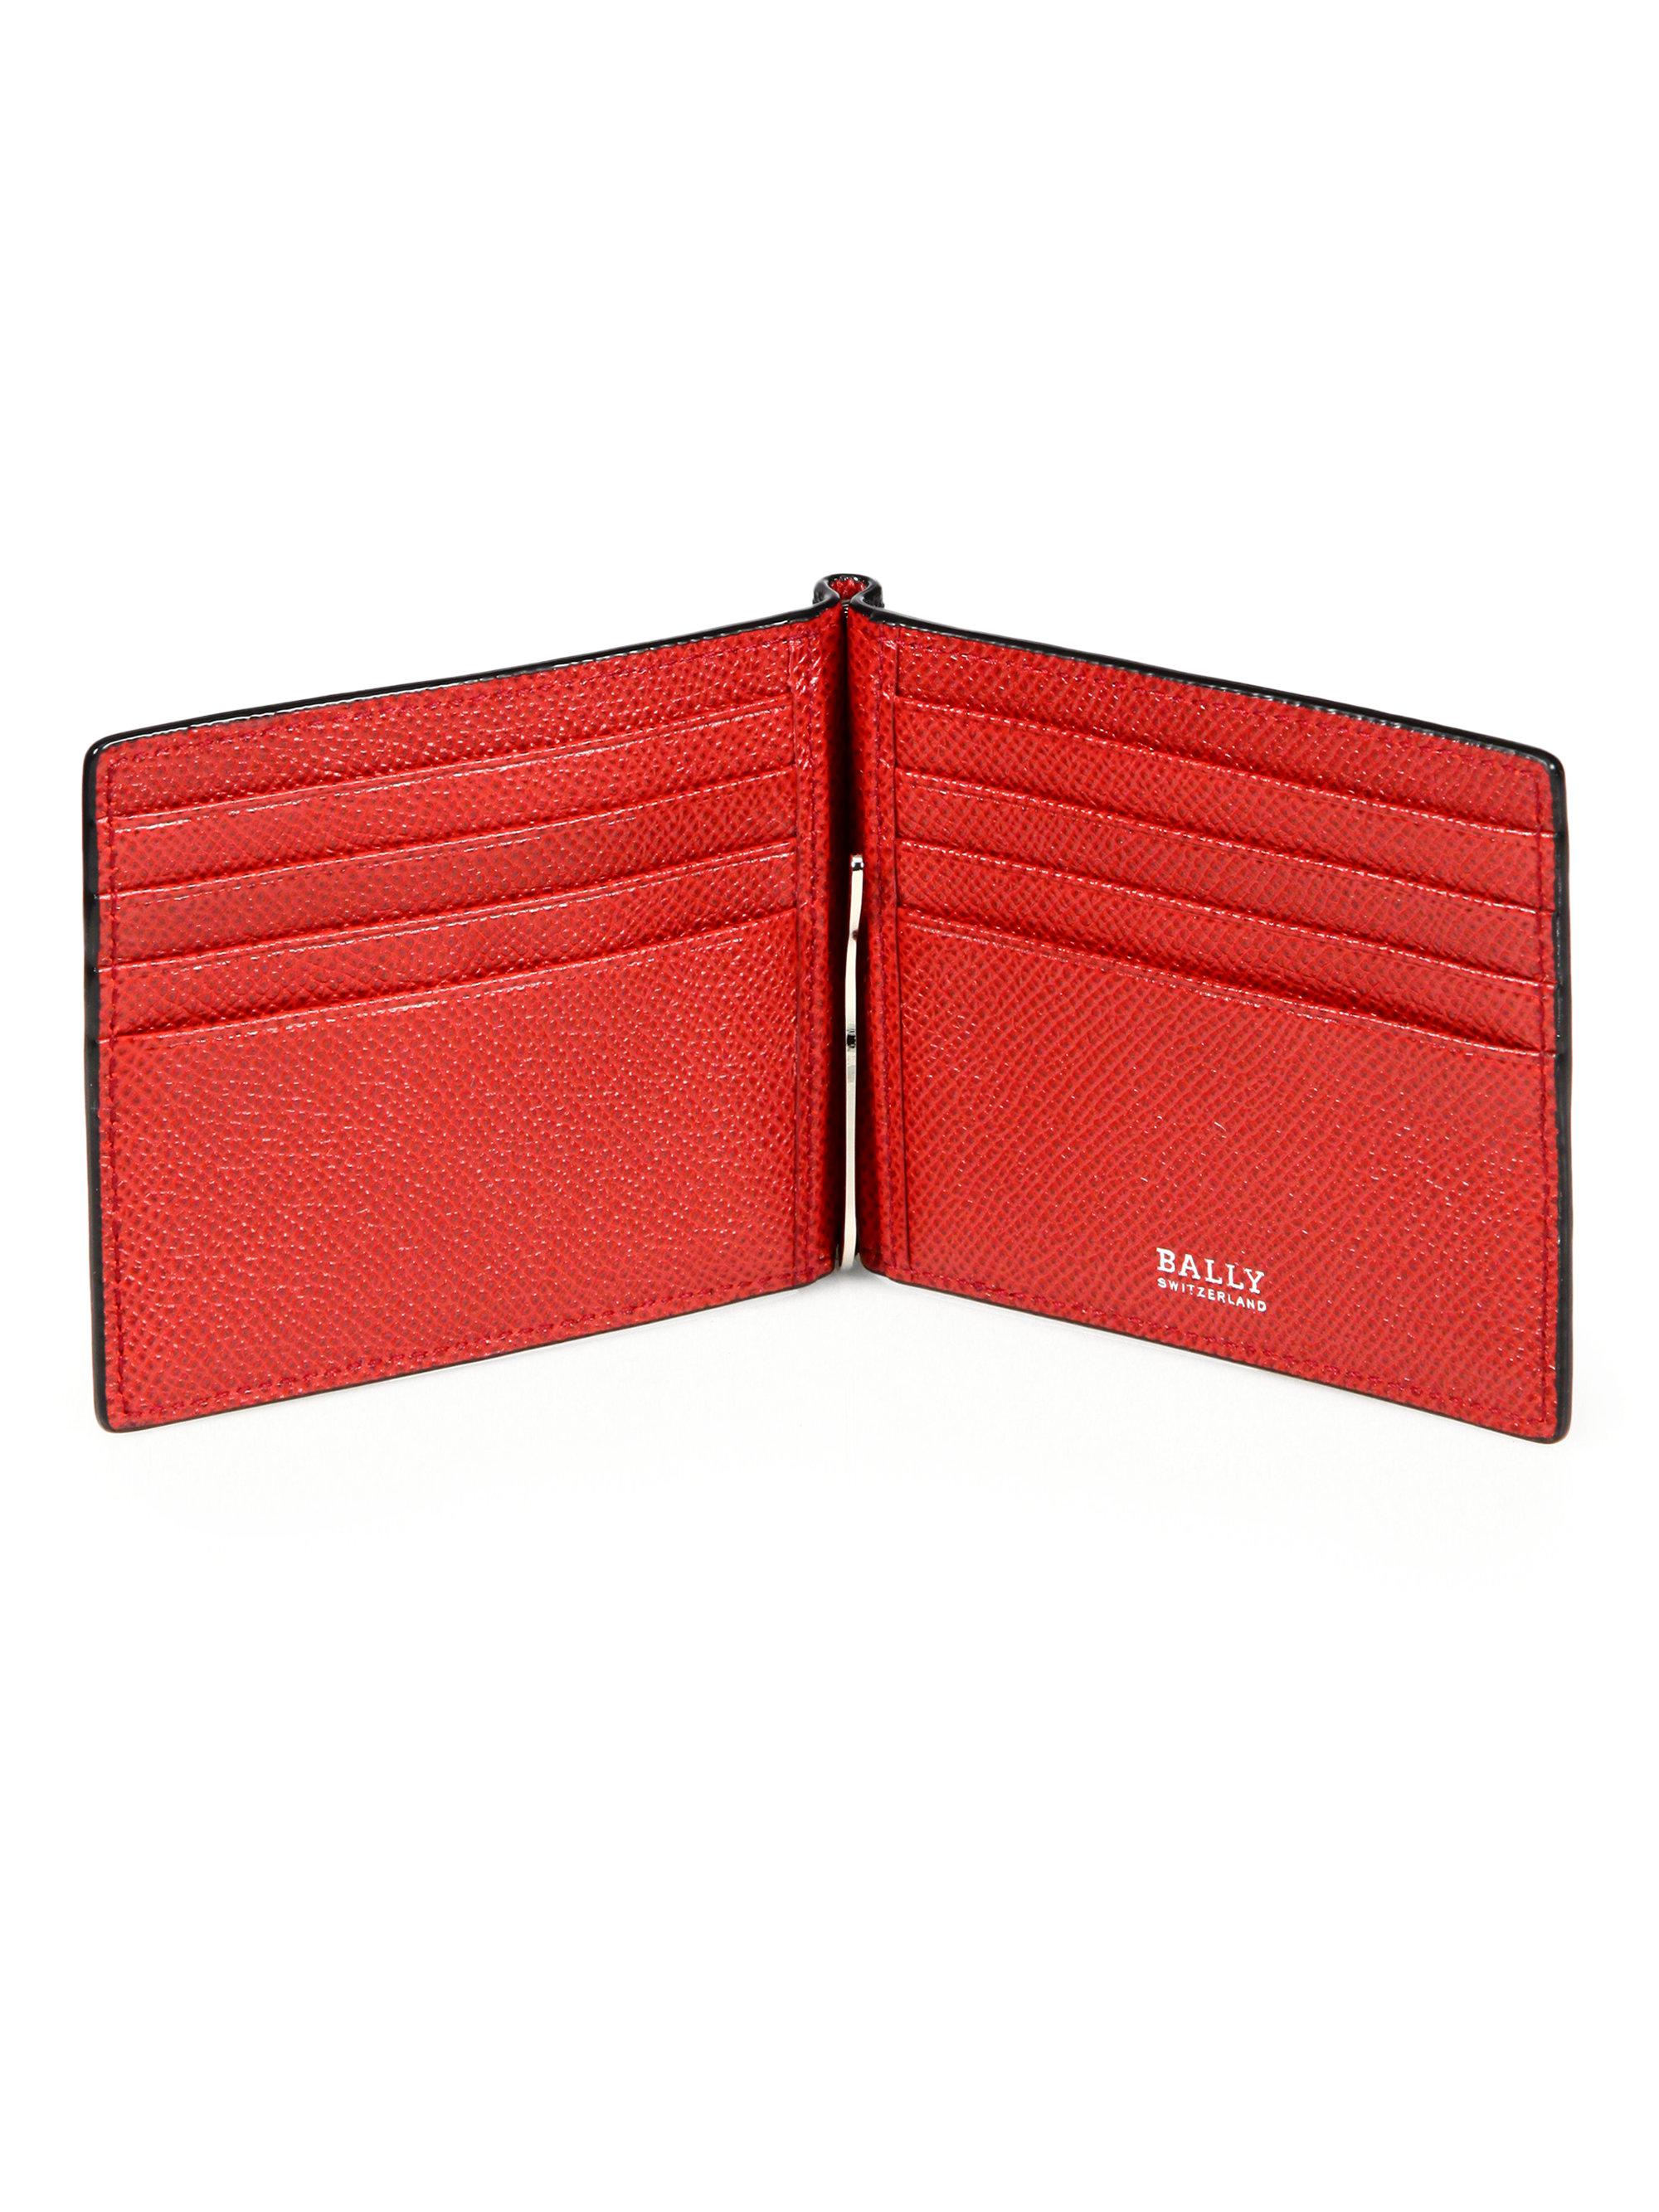 Bally Leather Money Clip Wallet in Red for Men | Lyst